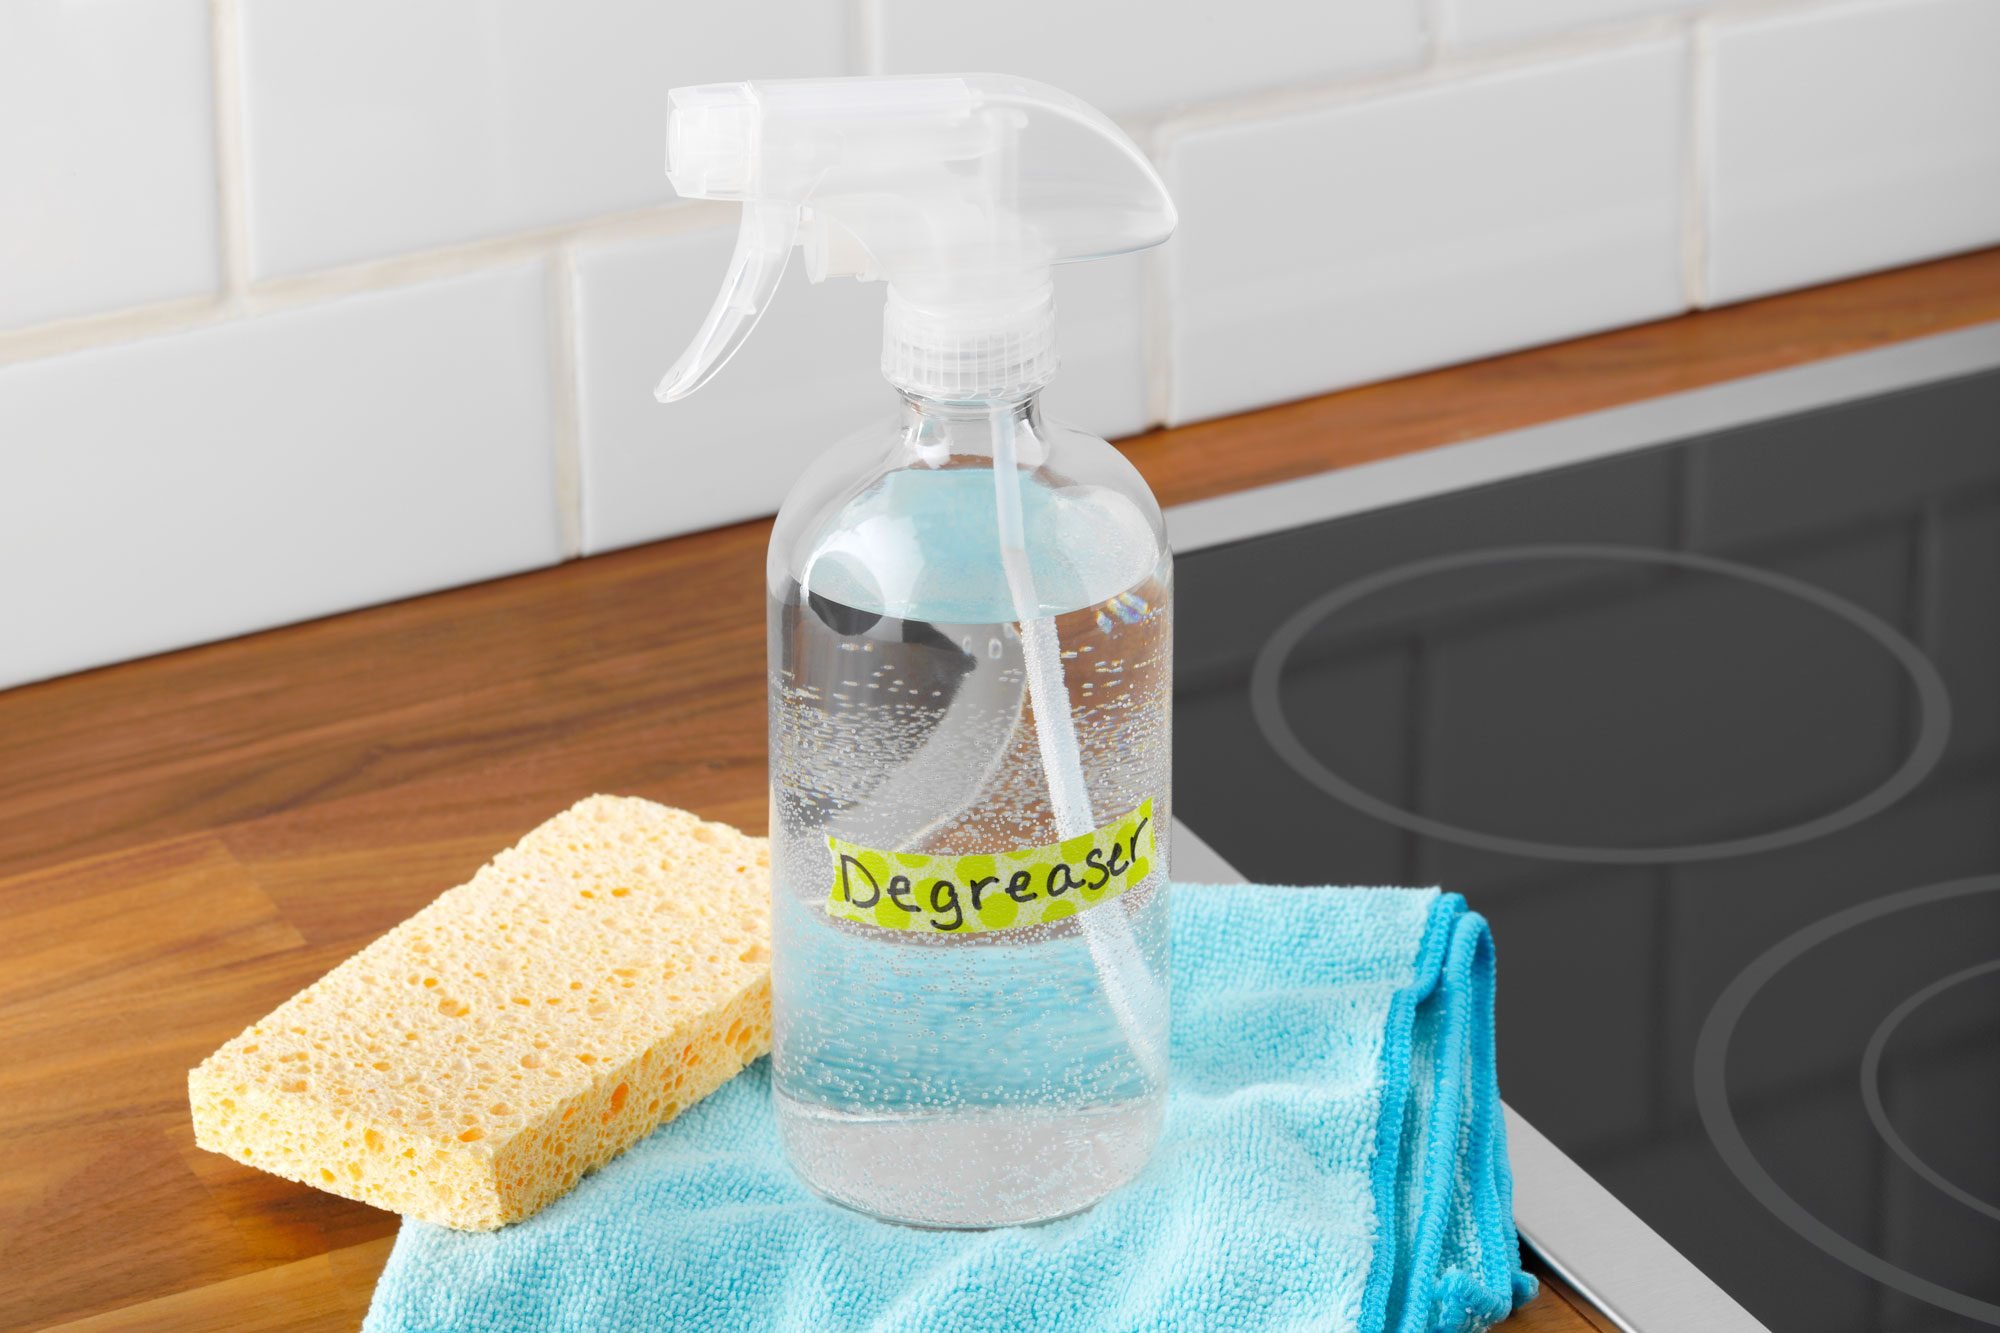 Homemade degreaser Cleaner in a spray bottle with a sponge and microfiber cloth on a kitchen counter near a stovetop